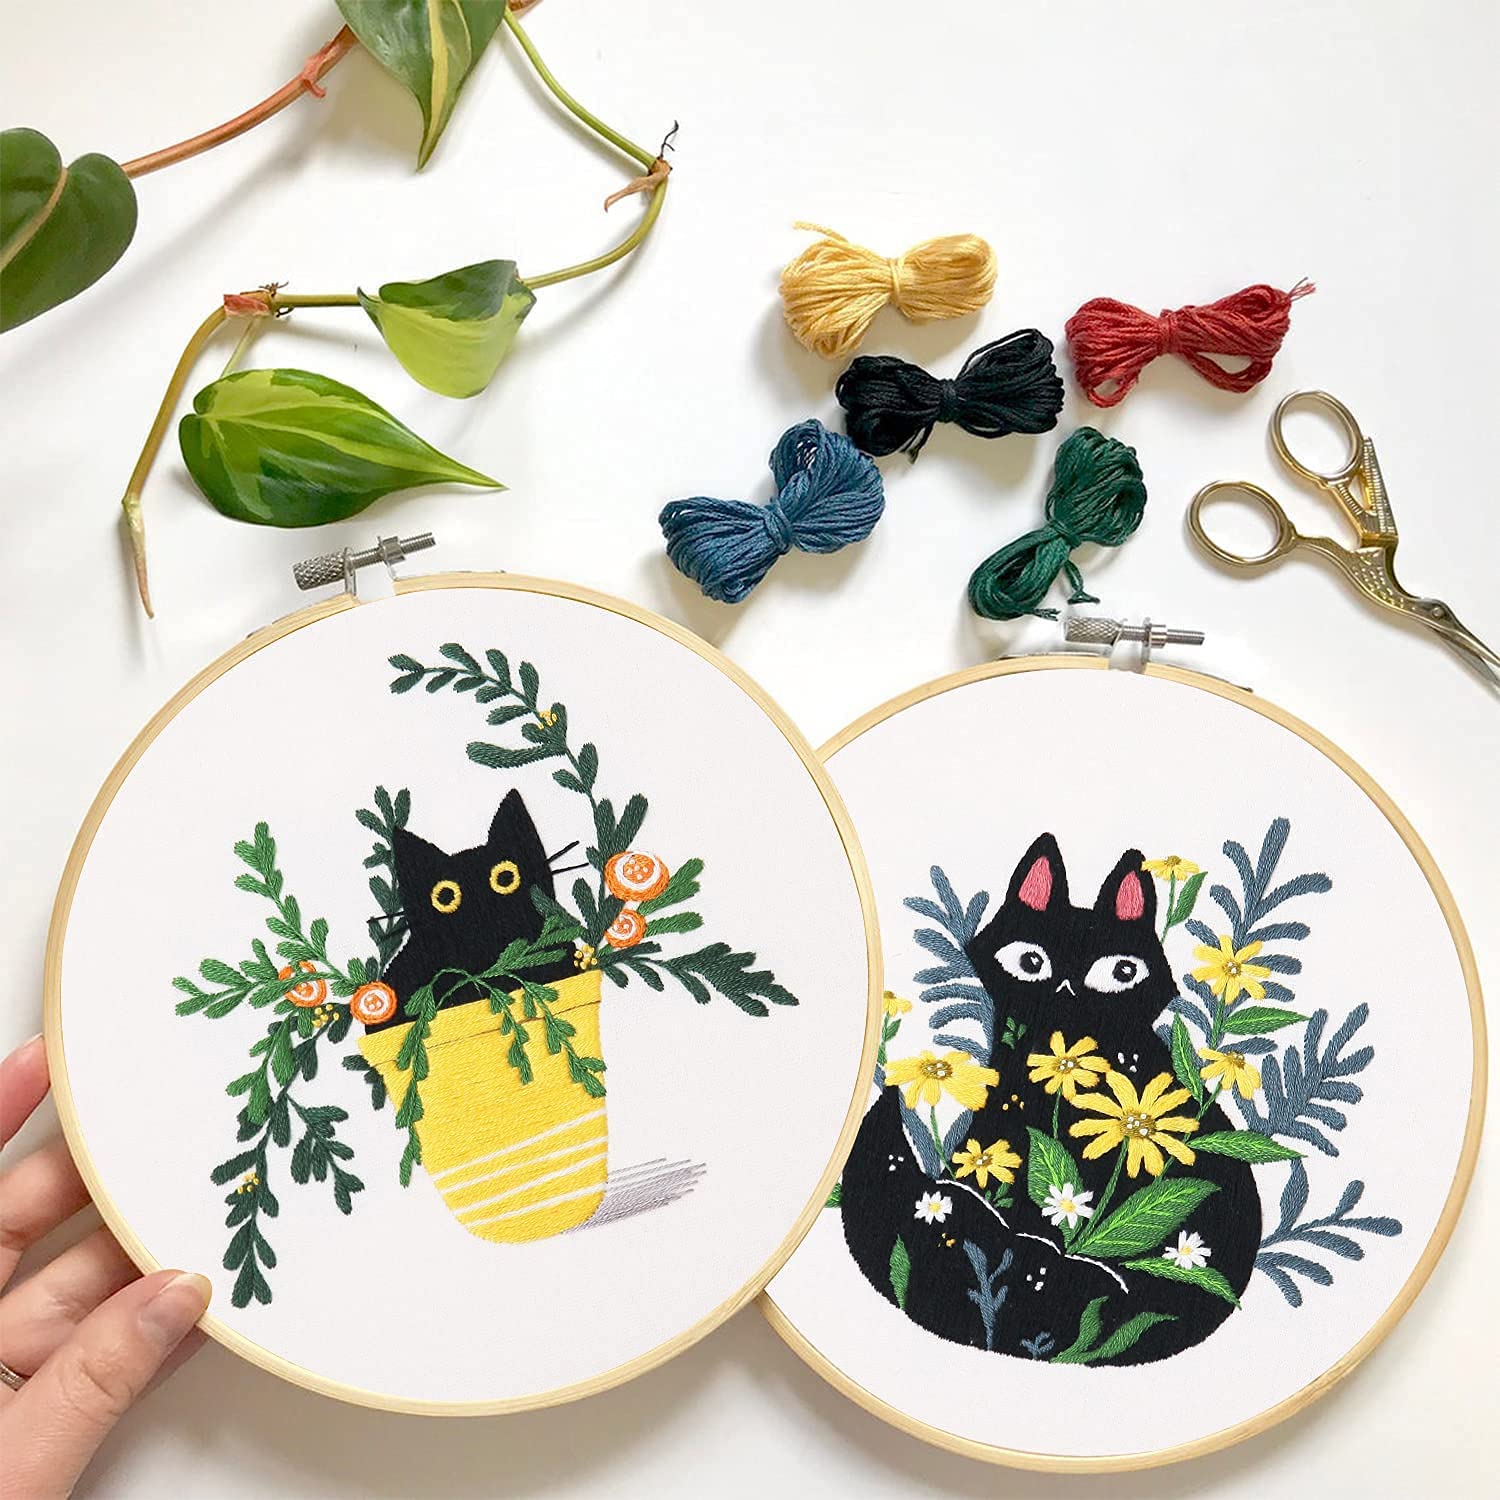 4 Pack Embroidery Kit Modern Art Cat with Tropical Houseplant Cactus Cross Stitch with Bamboo Hoops